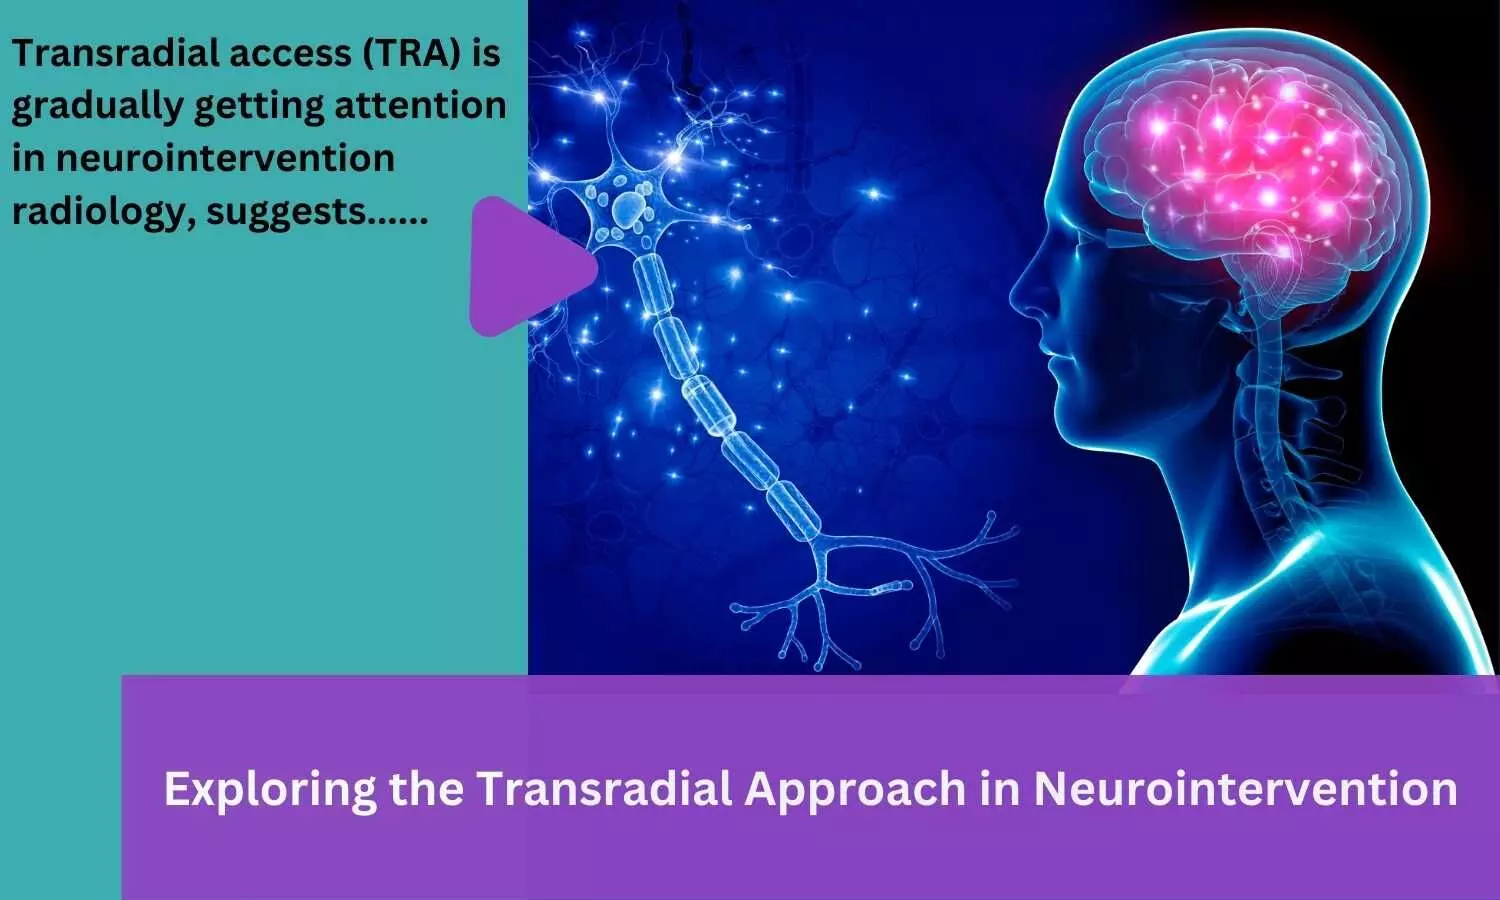 Exploring the Transradial Approach in Neurointervention